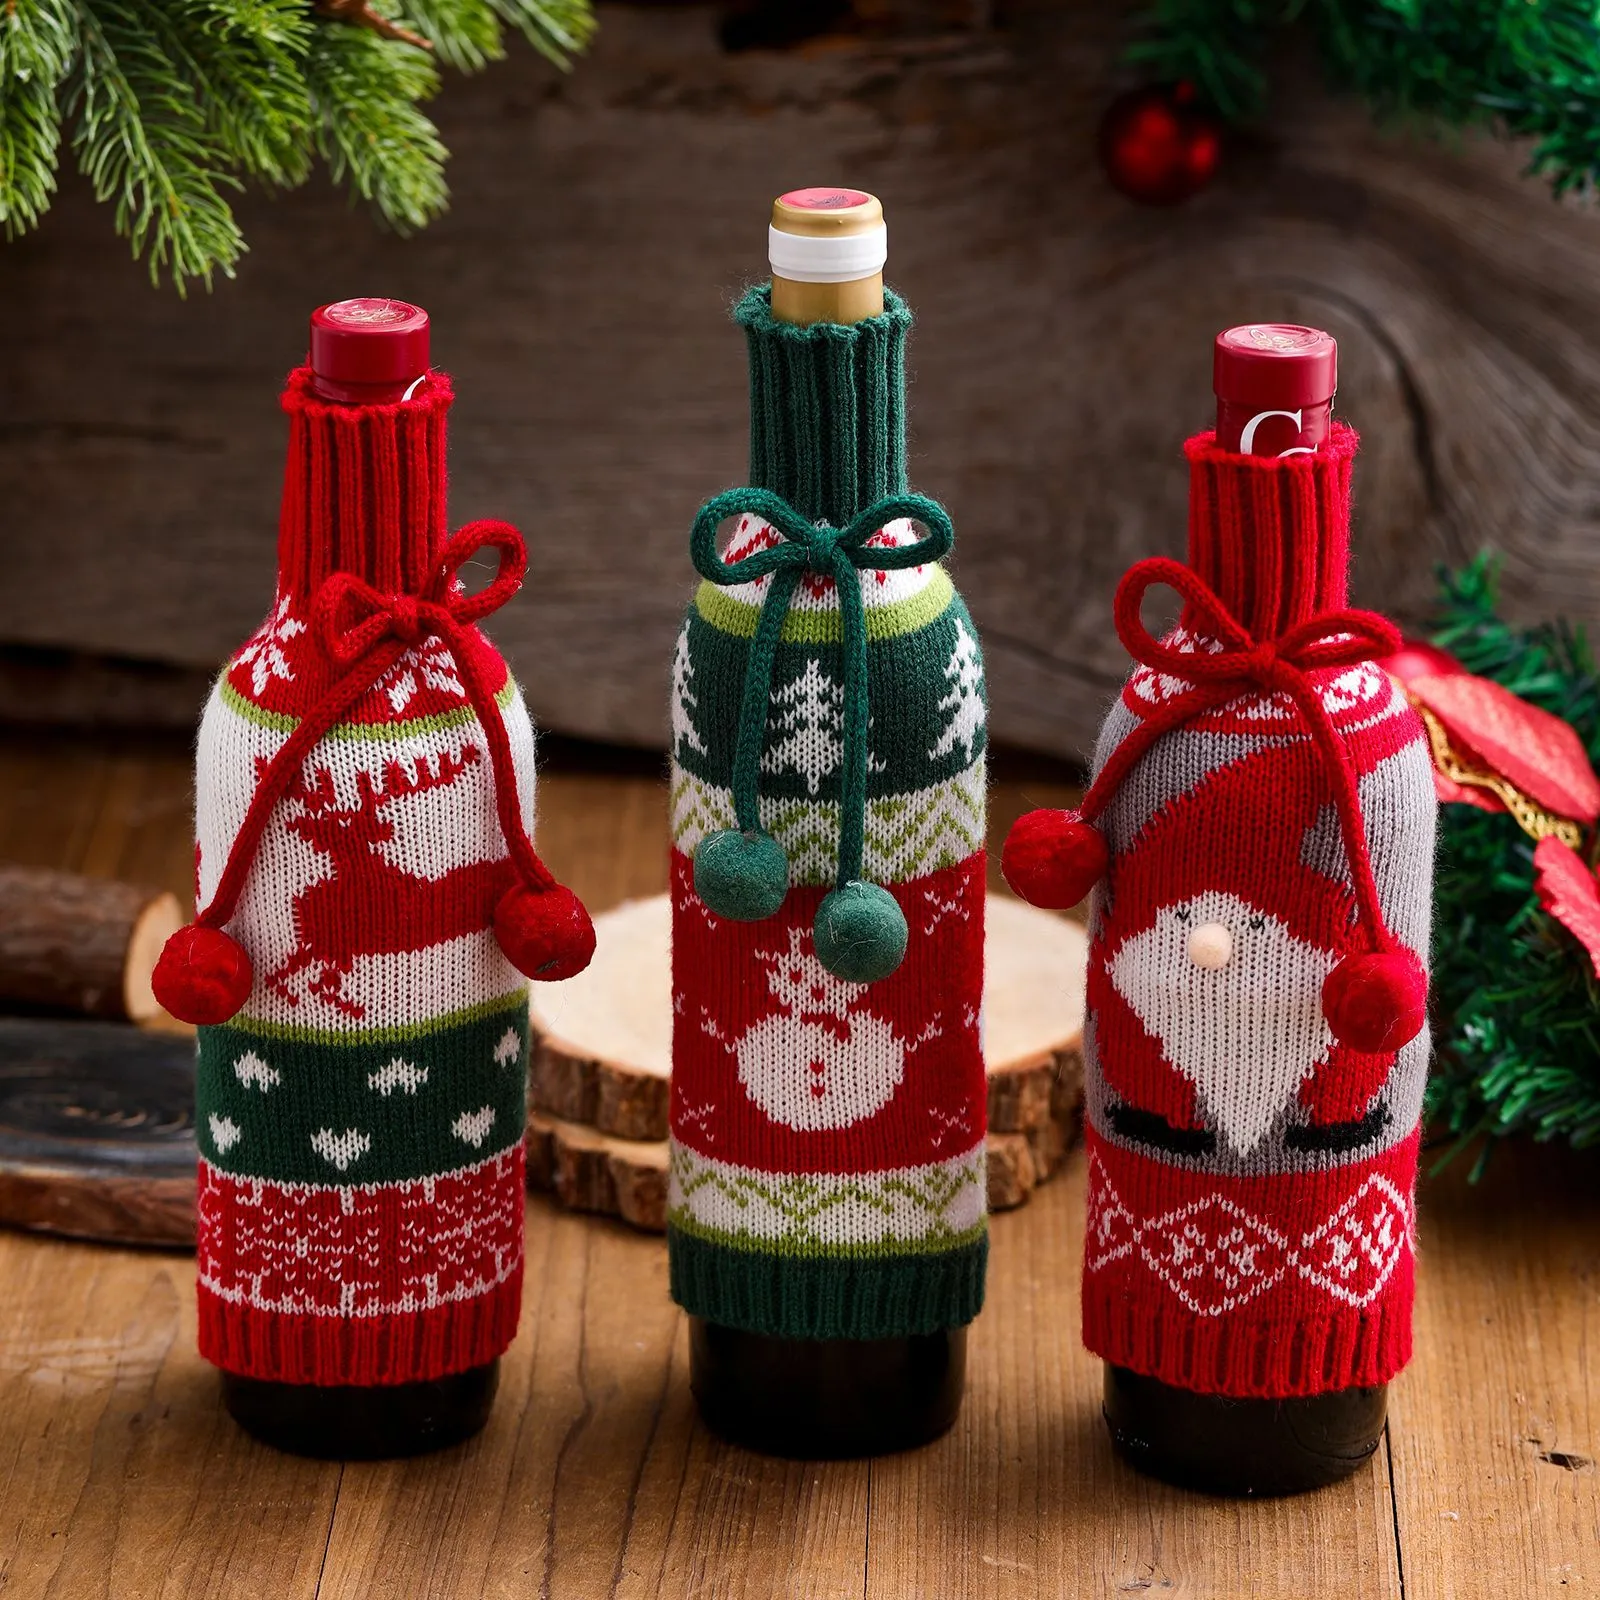 Christmas Decorations Knitted Wine Bottle Cover Bag Santa ELK Snowman Pattern Champagne Bags Banquet Party Decor Xmas Supplies YFA3048